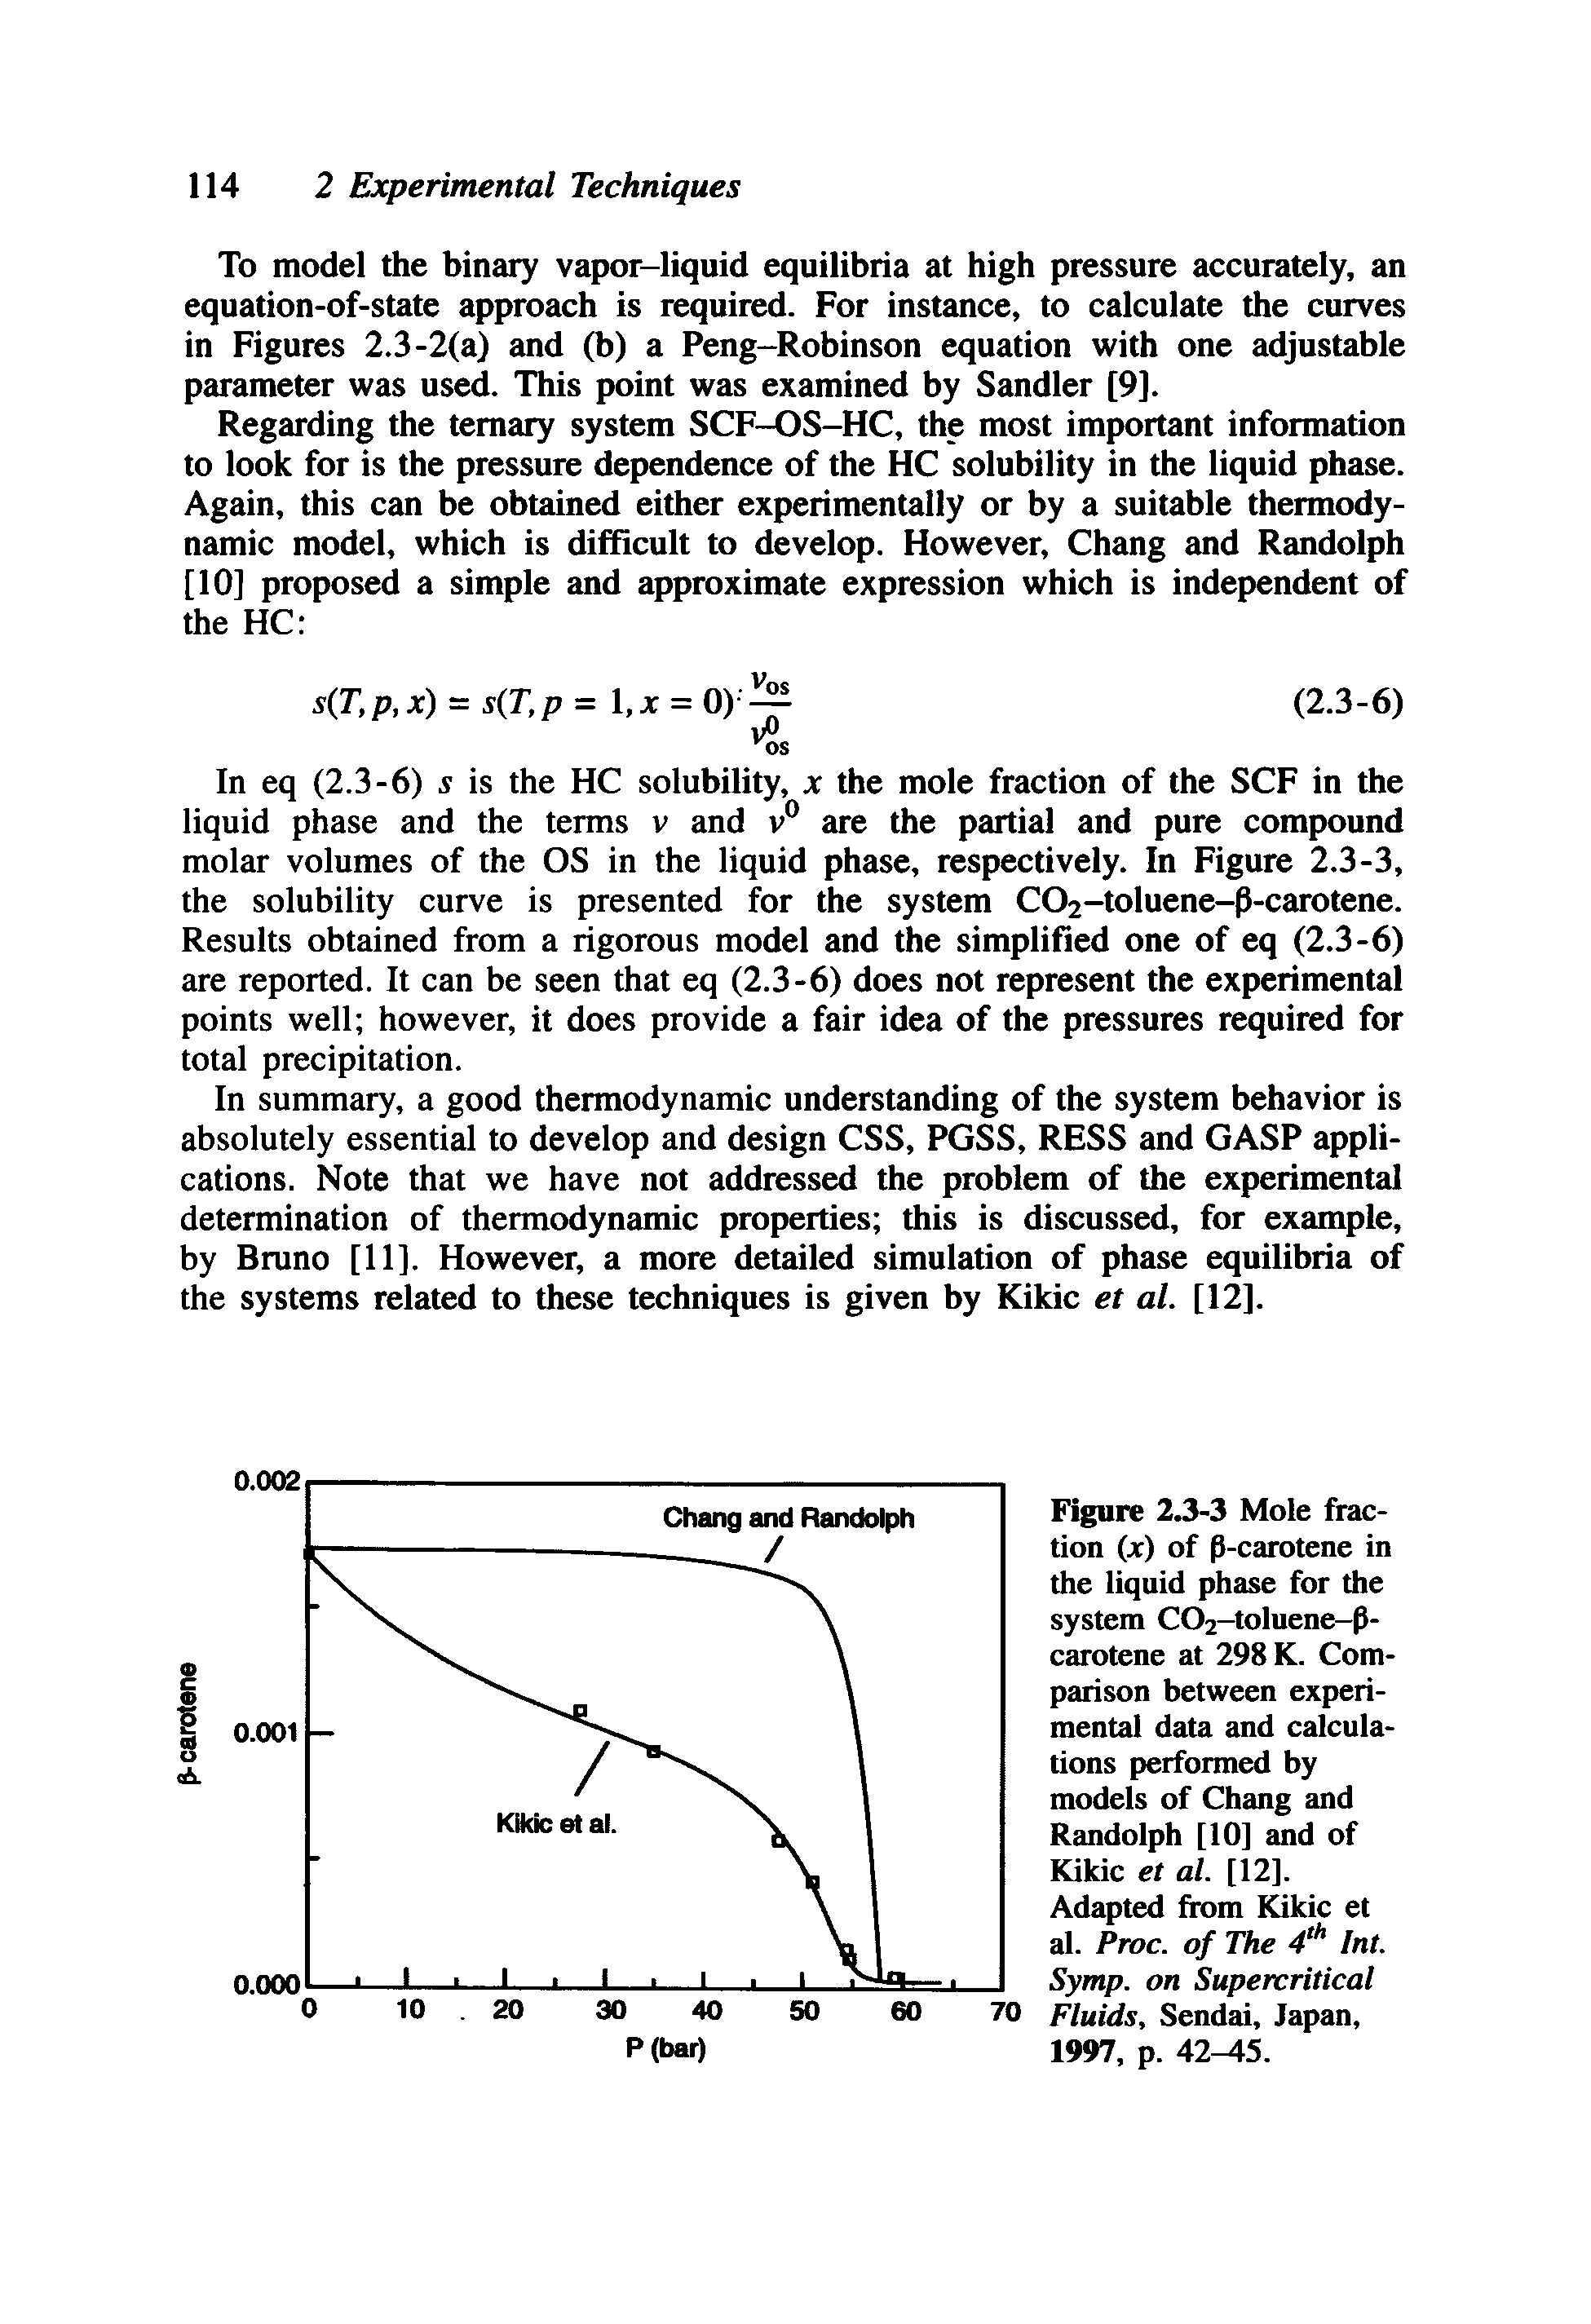 Figure 2.3-3 Mole fraction (jc) of P-carotene in the liquid phase for the system CO2—toluene-p-carotene at 298 K. Comparison between experimental data and calculations performed by models of Chang and Randolph [10] and of Kikic et al. [12]. Adapted from Kikic et al. Proc. of The 4 Int. Symp. on Supercritical Fluids, Sendai, Japan, 1997, p. 42 5.